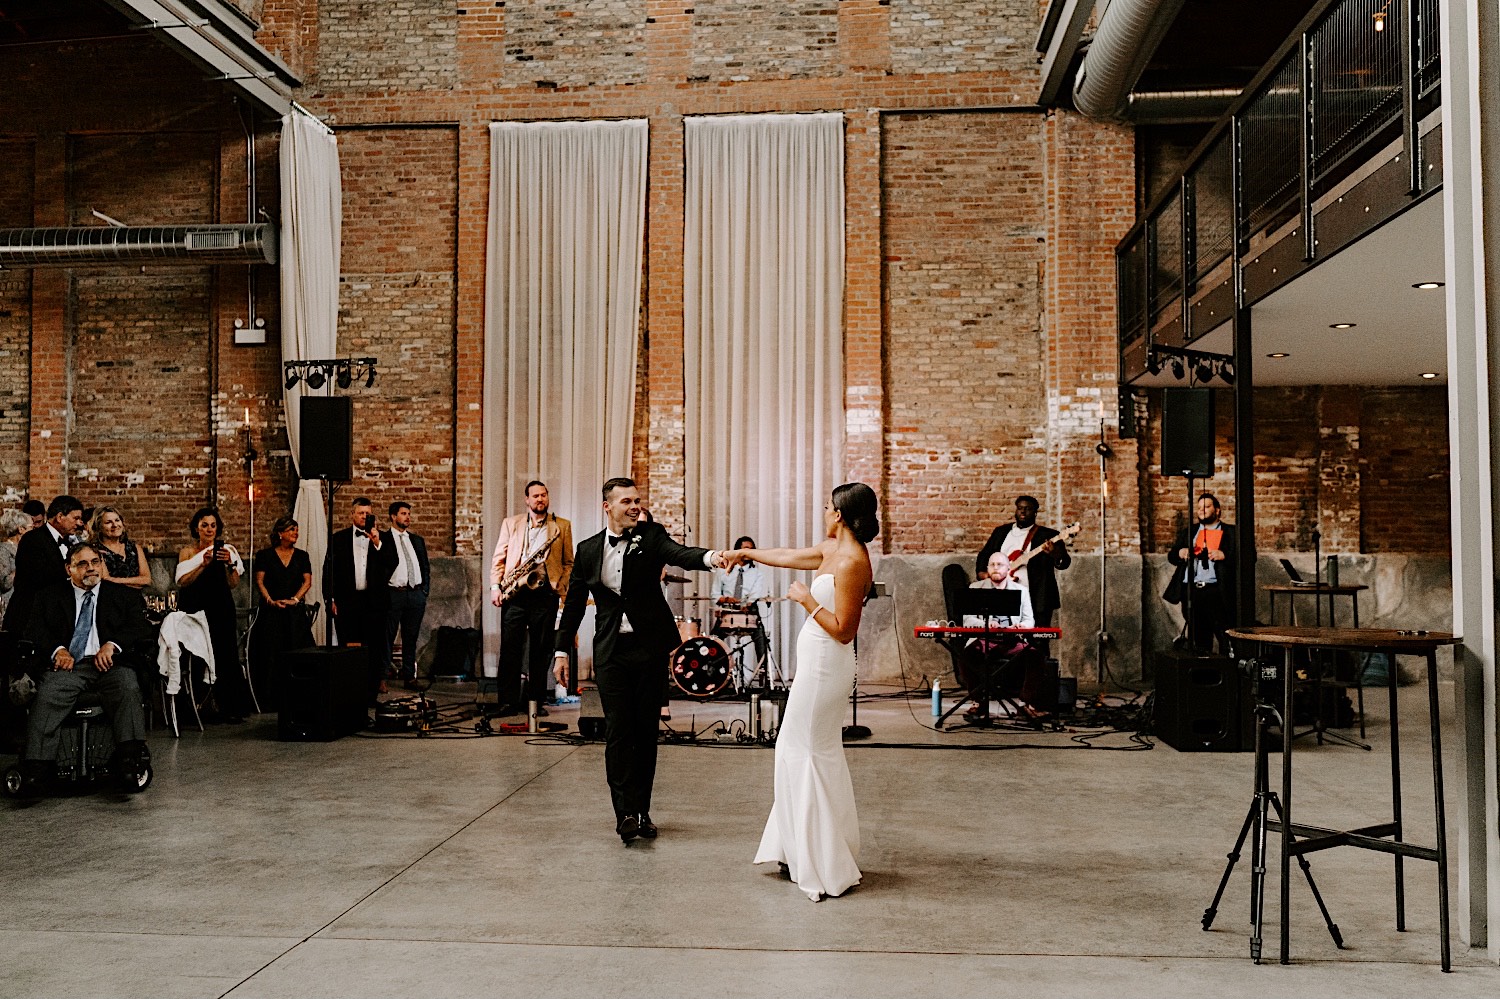 A bride and groom dance in a large brick building with a live band playing behind them and their guests to the left cheering for and watching them